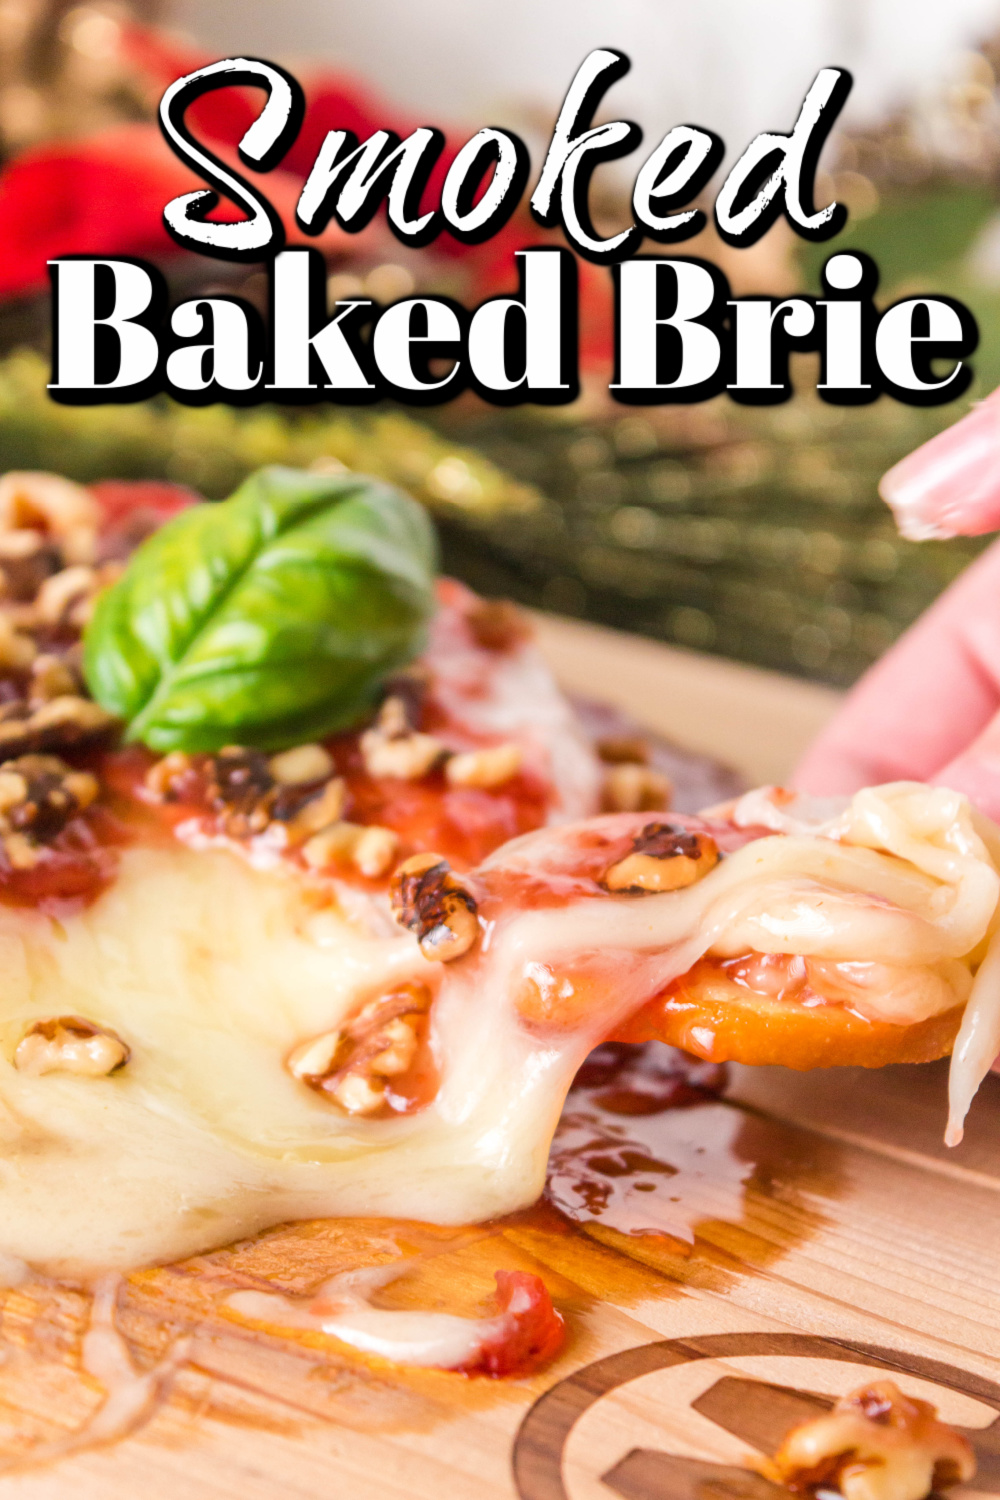 This Smoked Baked Brie is a special cheesy treat that you can serve anytime! I know you are going to love it!